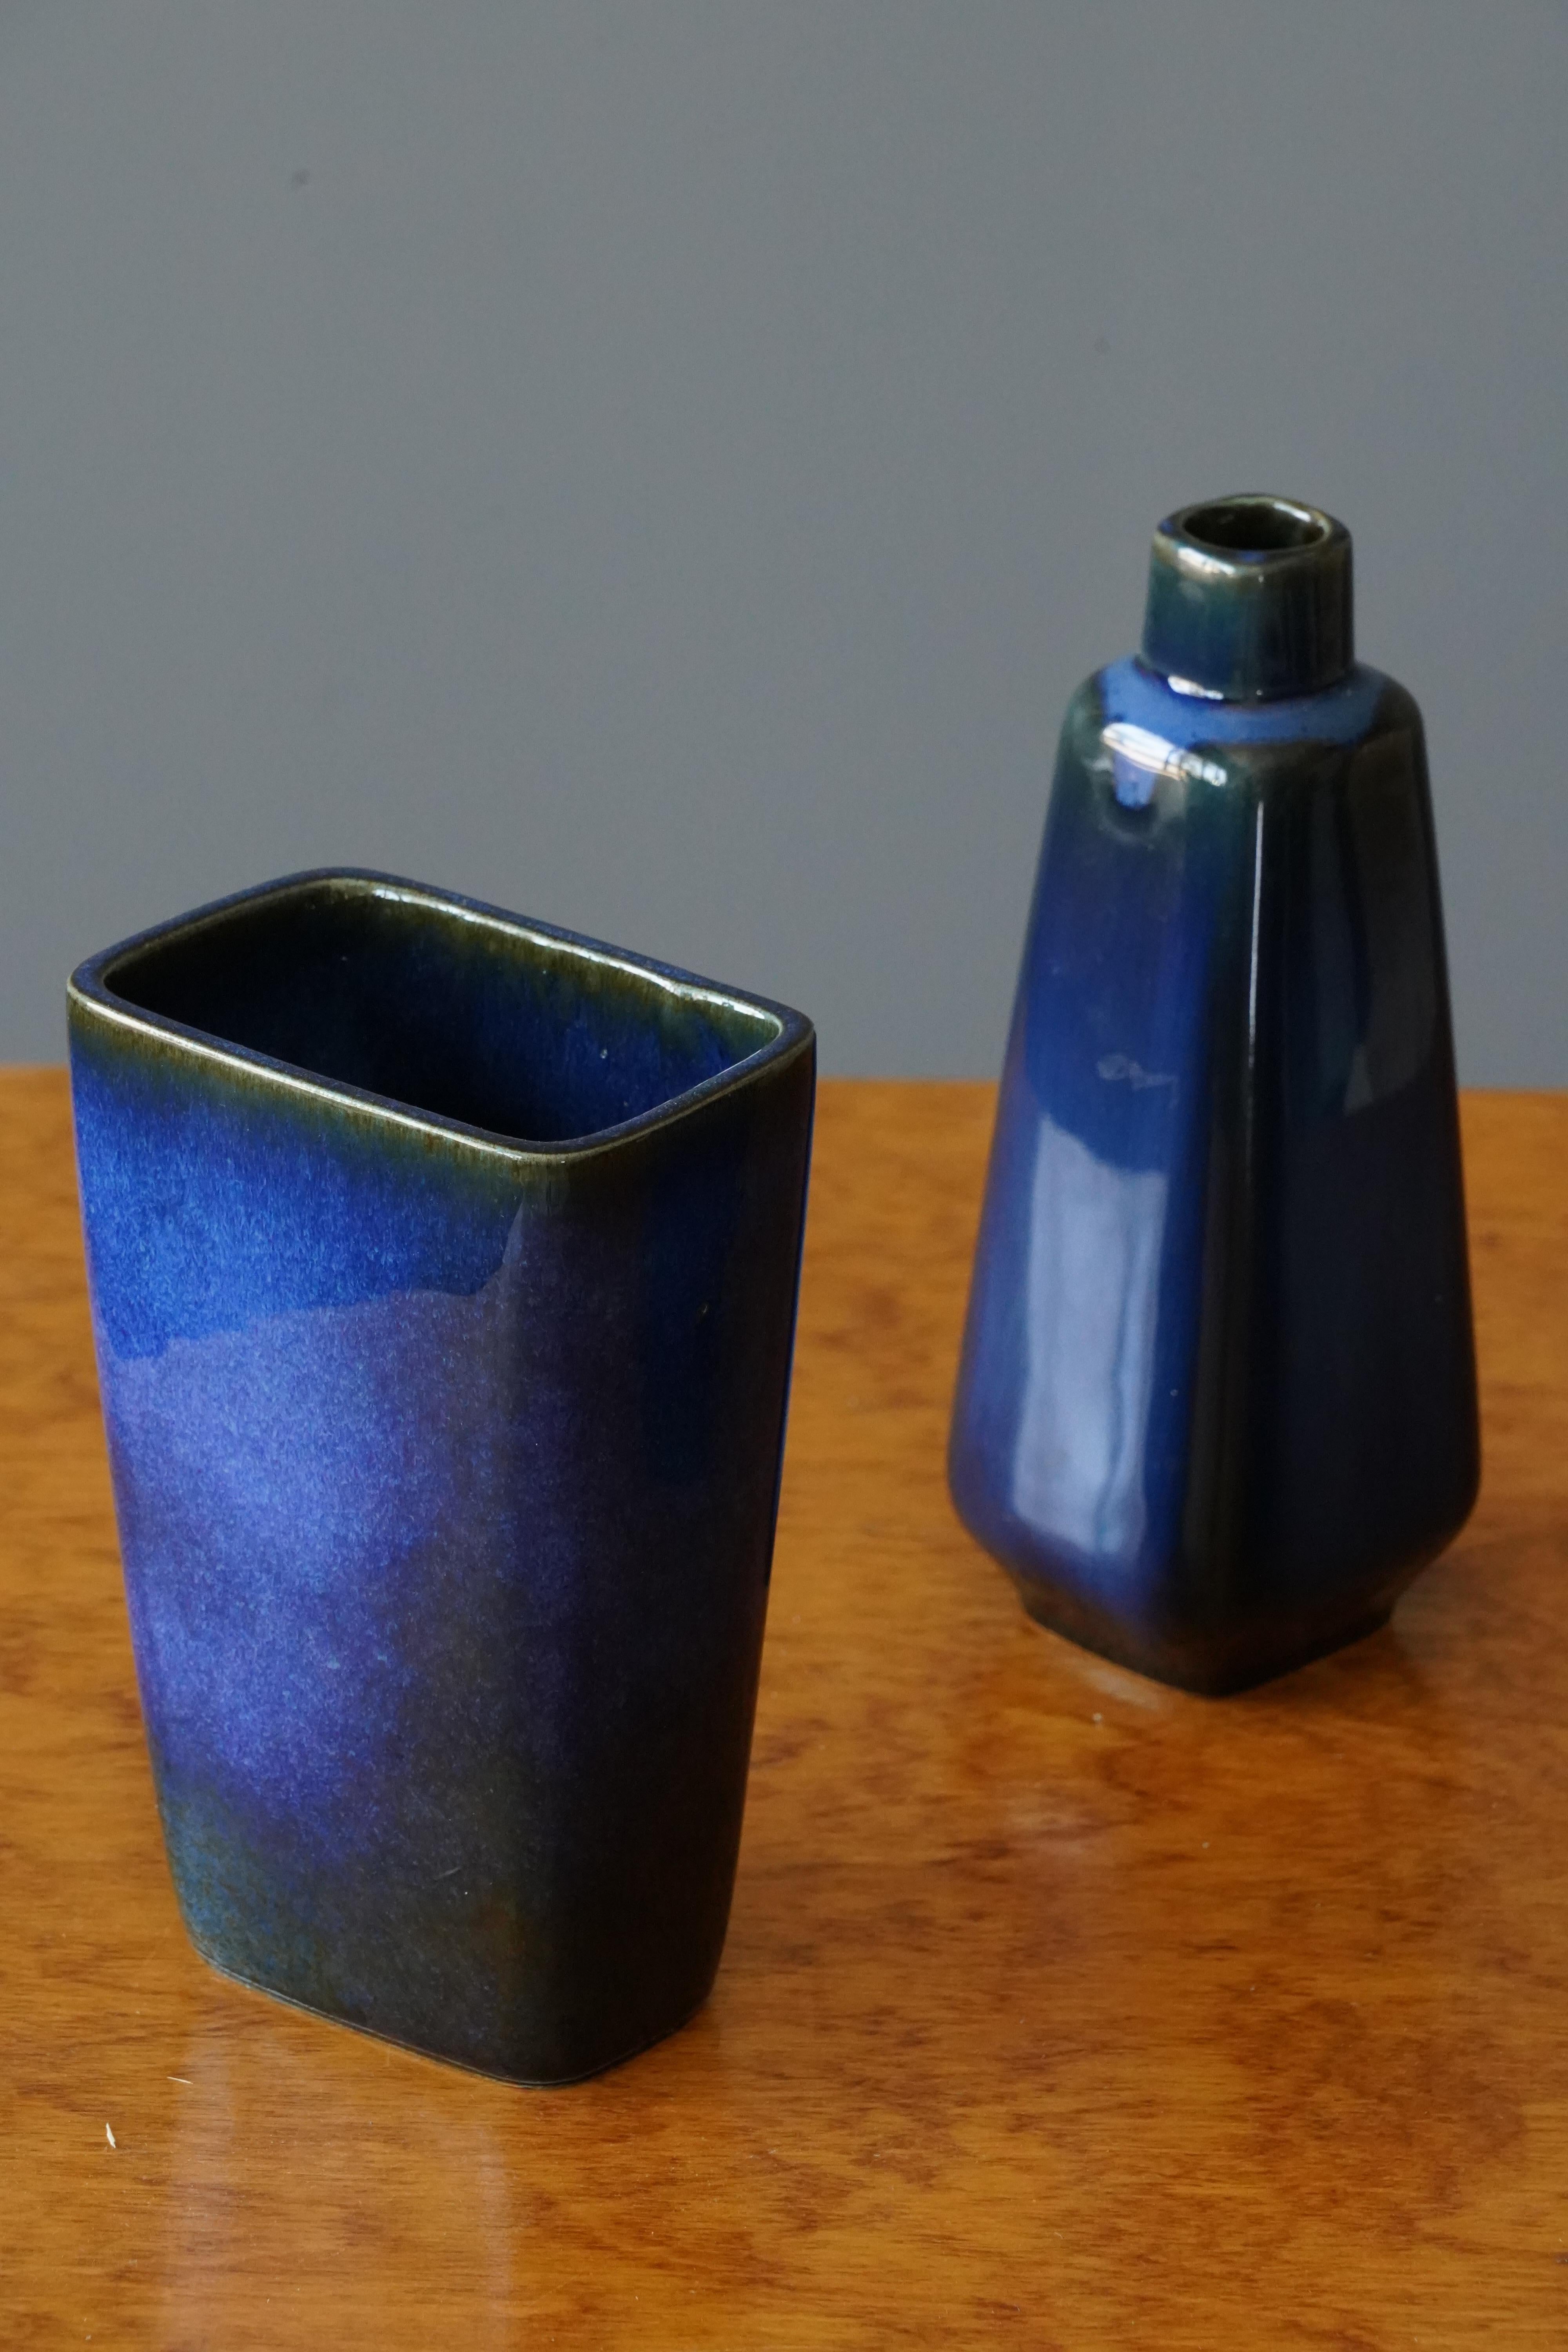 A set of three vases designed by Sven Jonsson for Gustavsberg. Designed and produced in the 1960s. In blue glazed stoneware. 

Dimensions for three vases - 2.8 x 4.25 x 6.75 / 3x 3x 8.2 / 2.2 x 3 x 5.